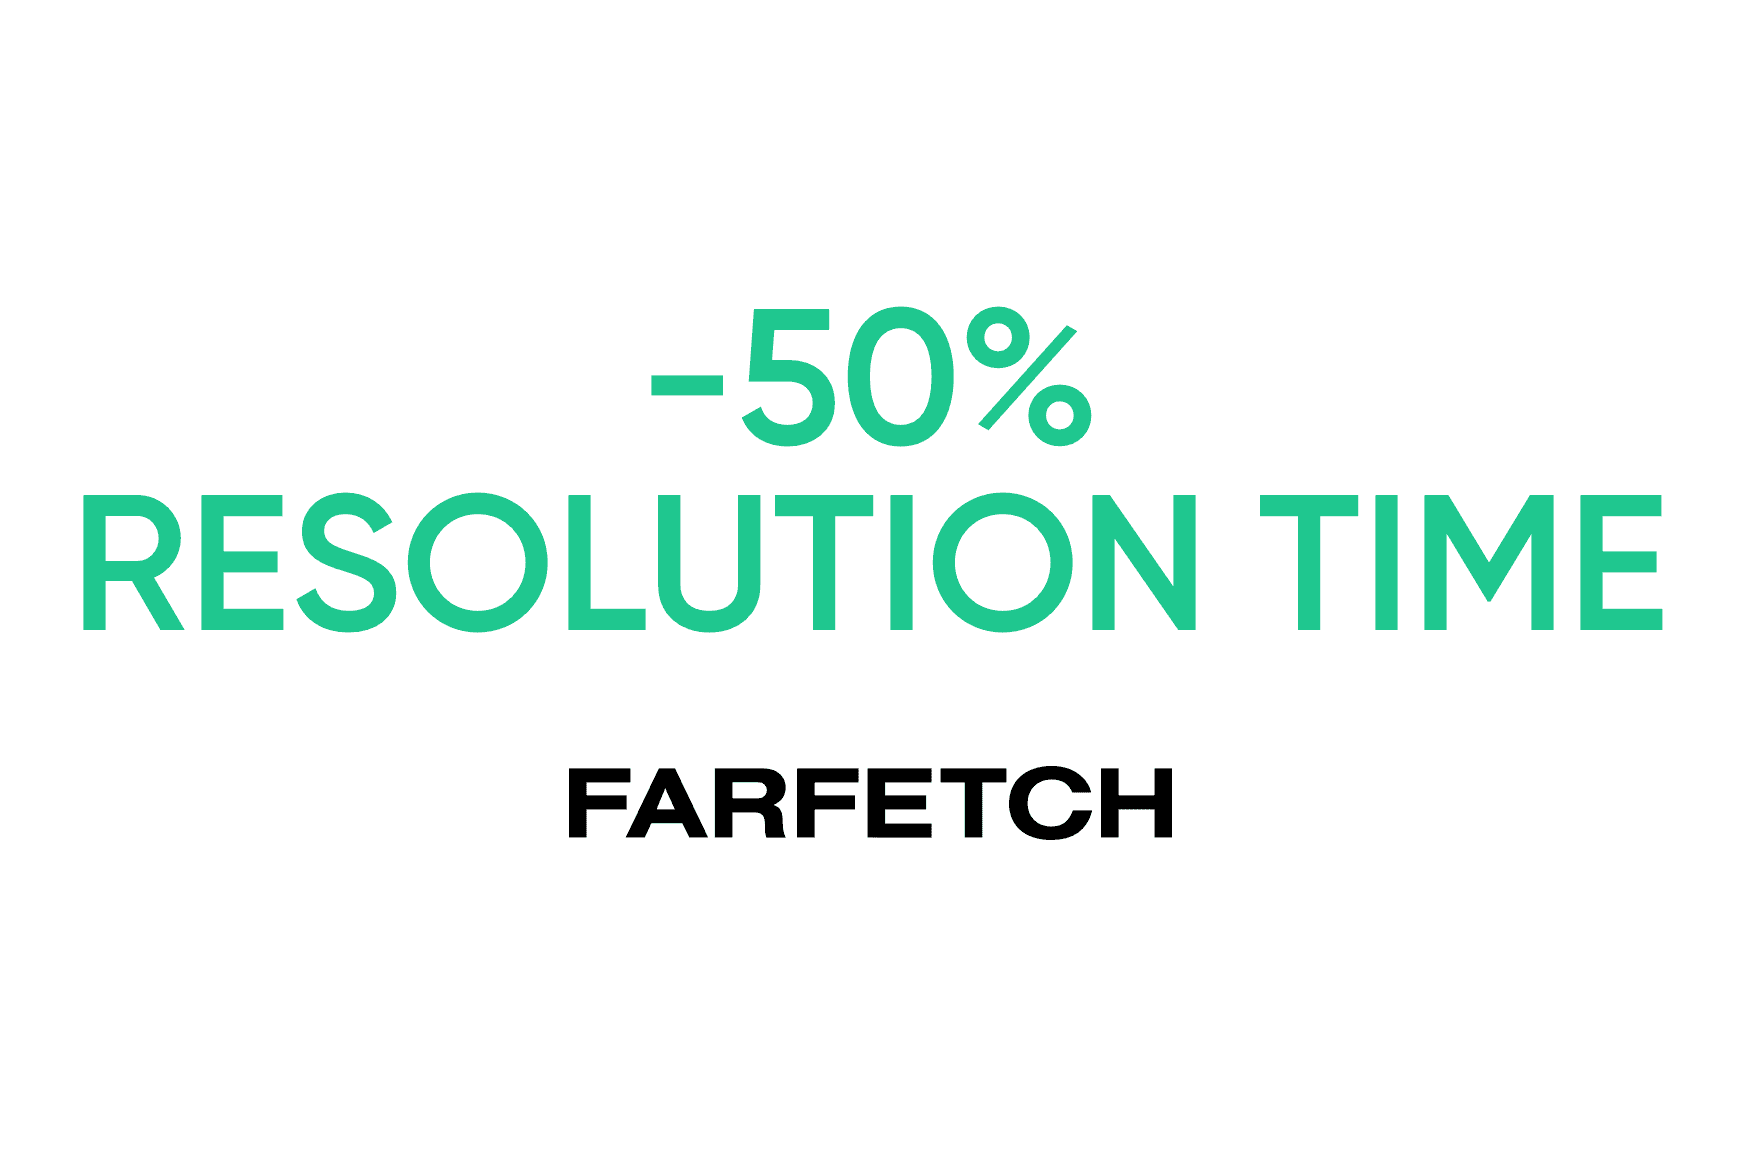 Farfetch: Reduced handling/resolution times by more than 50%